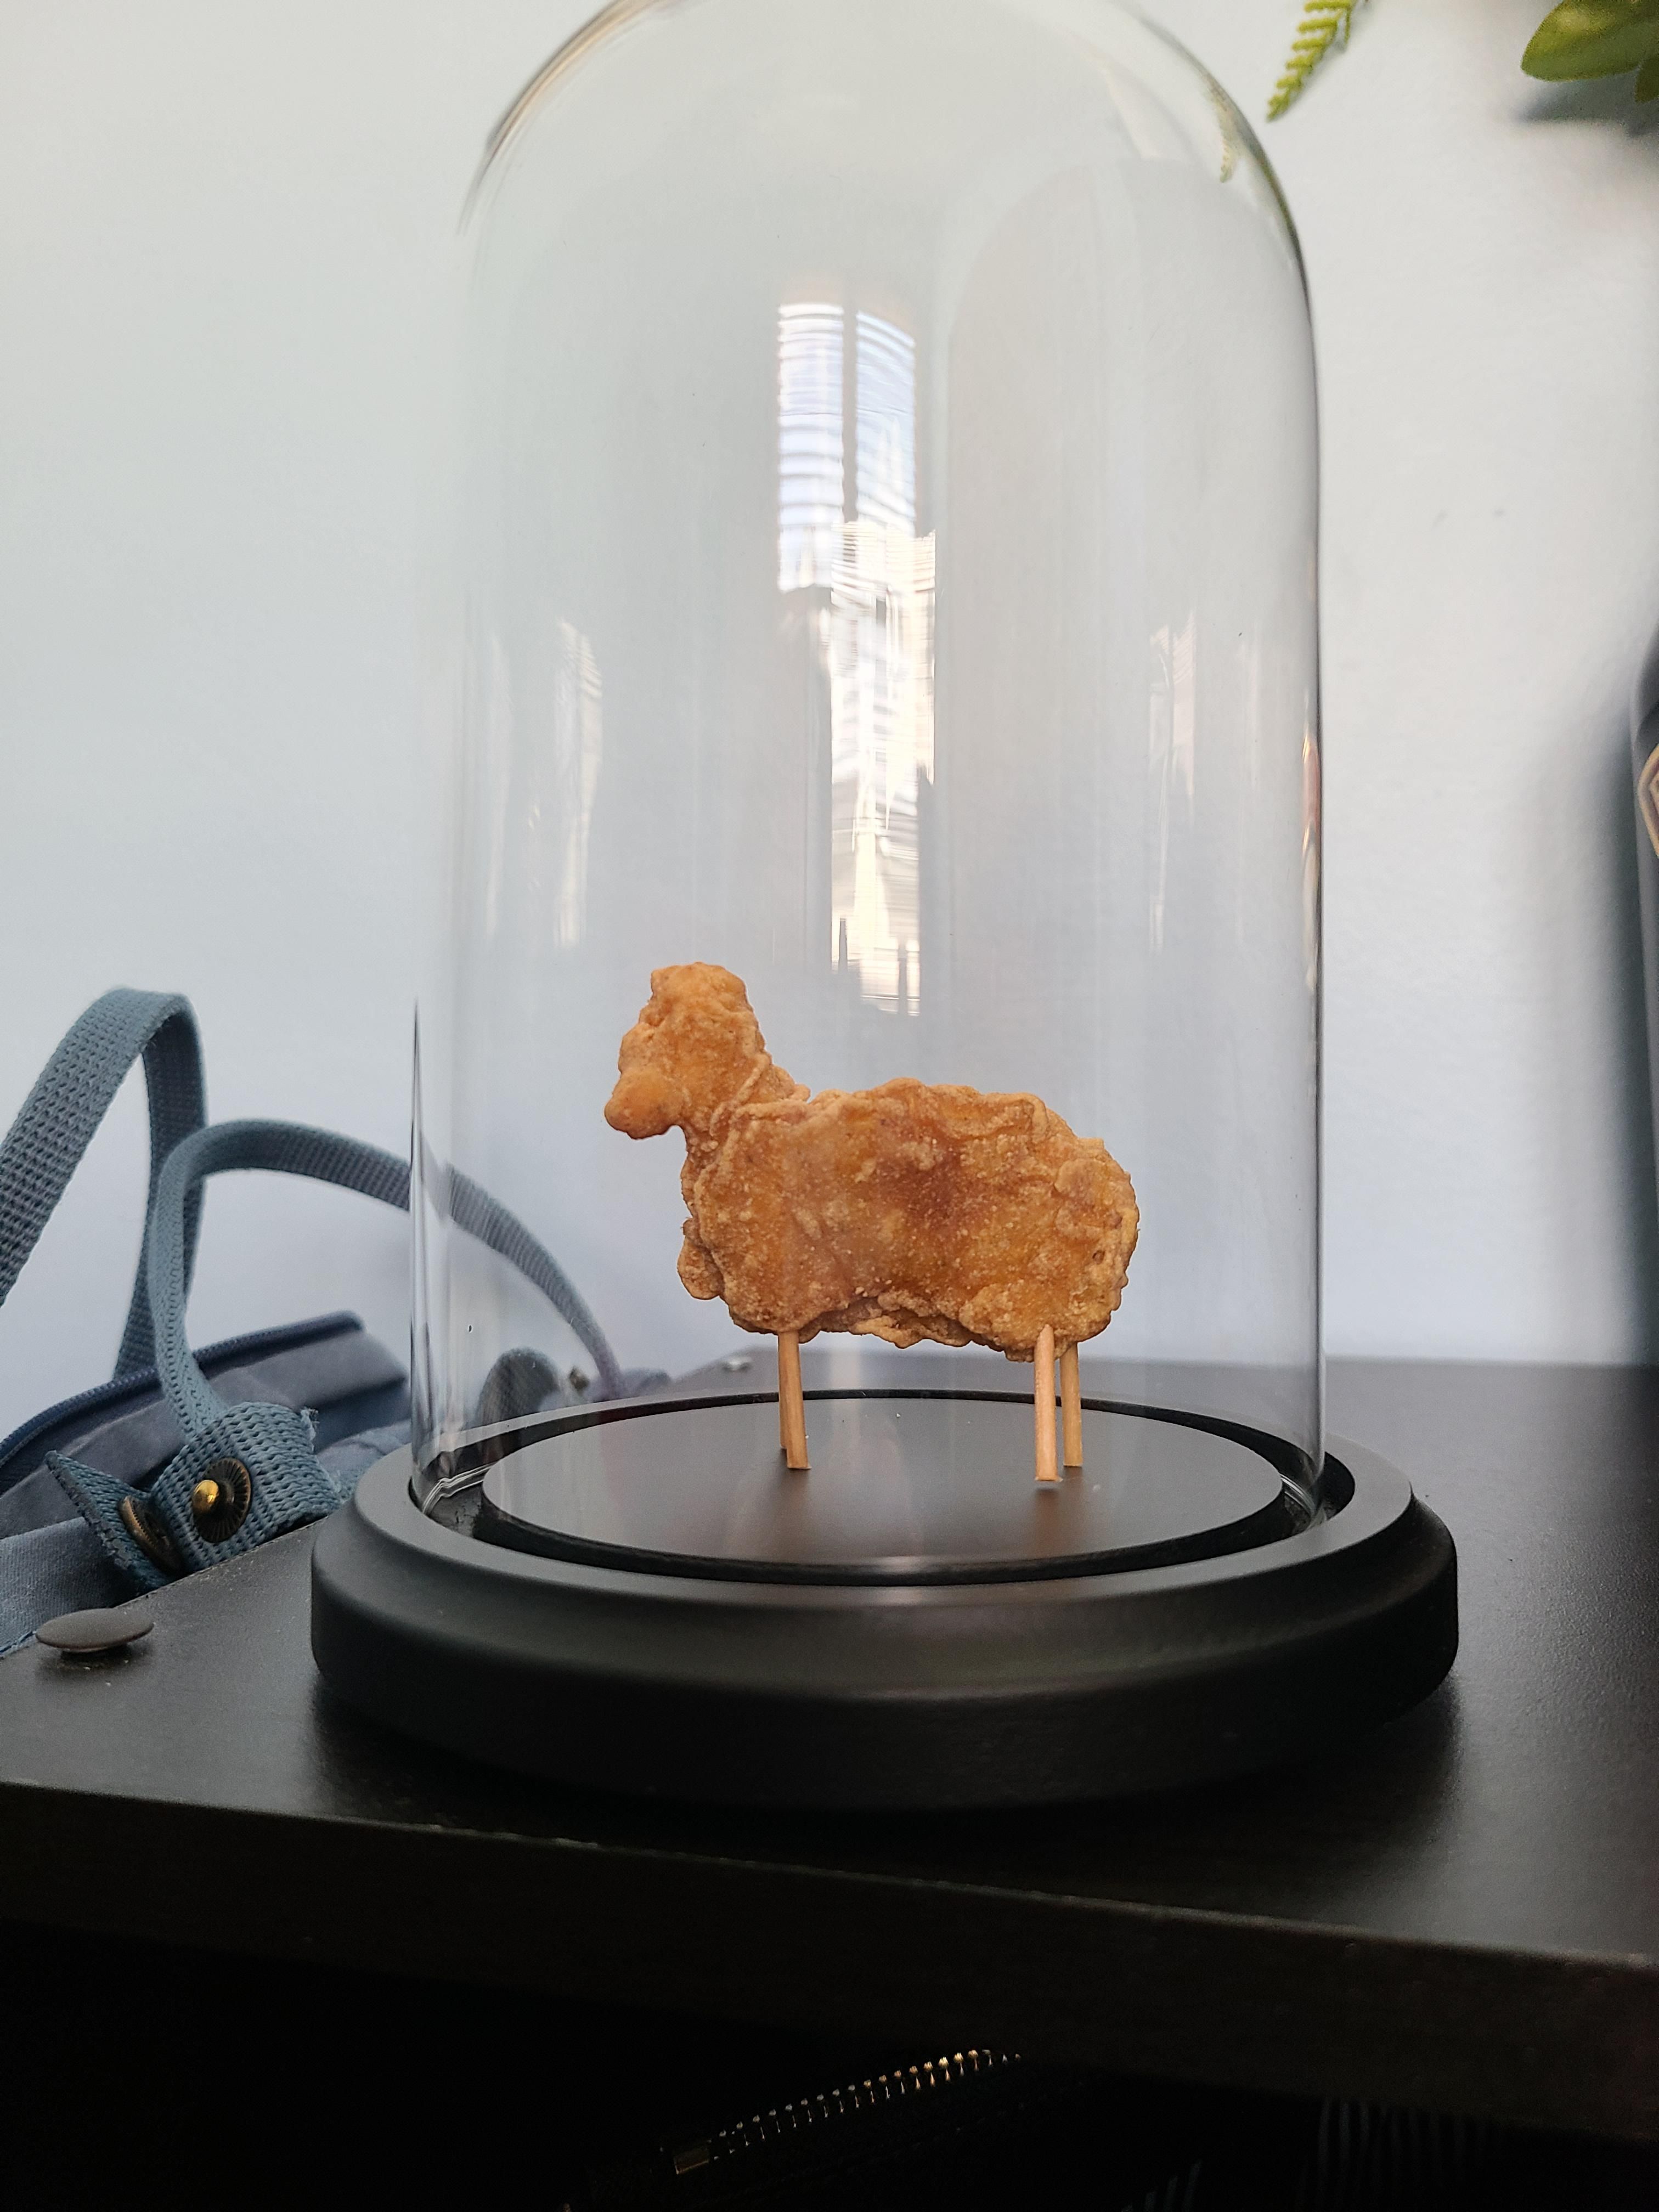 I'm the owner of the lamb chicken nugget and it now resides in its own display case